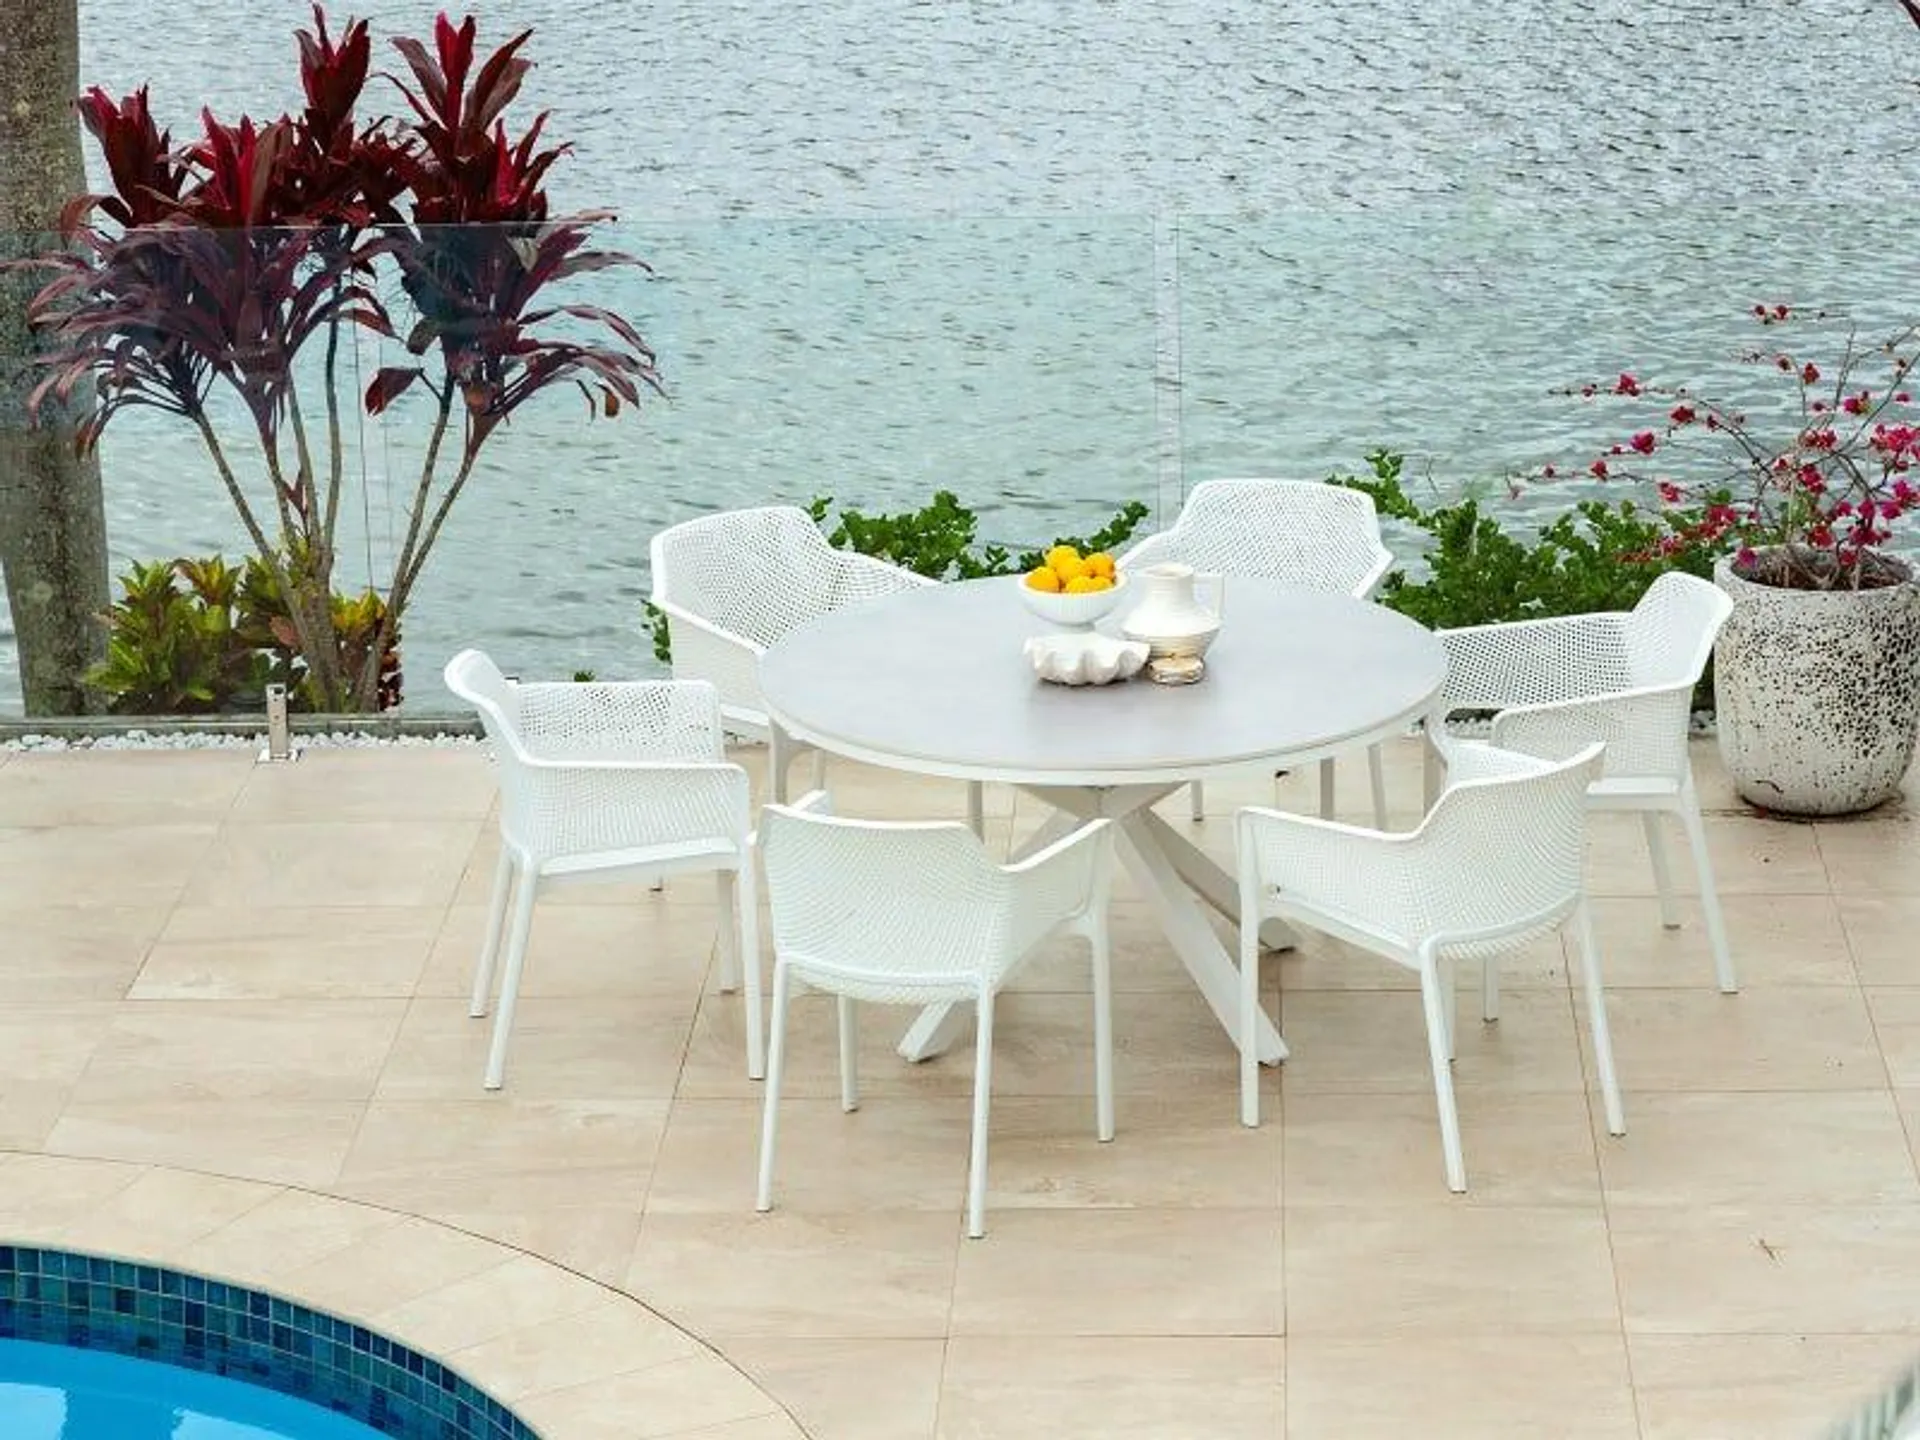 Adele Round Ceramic Table with Bailey Chairs 7pc Outdoor Dining Setting